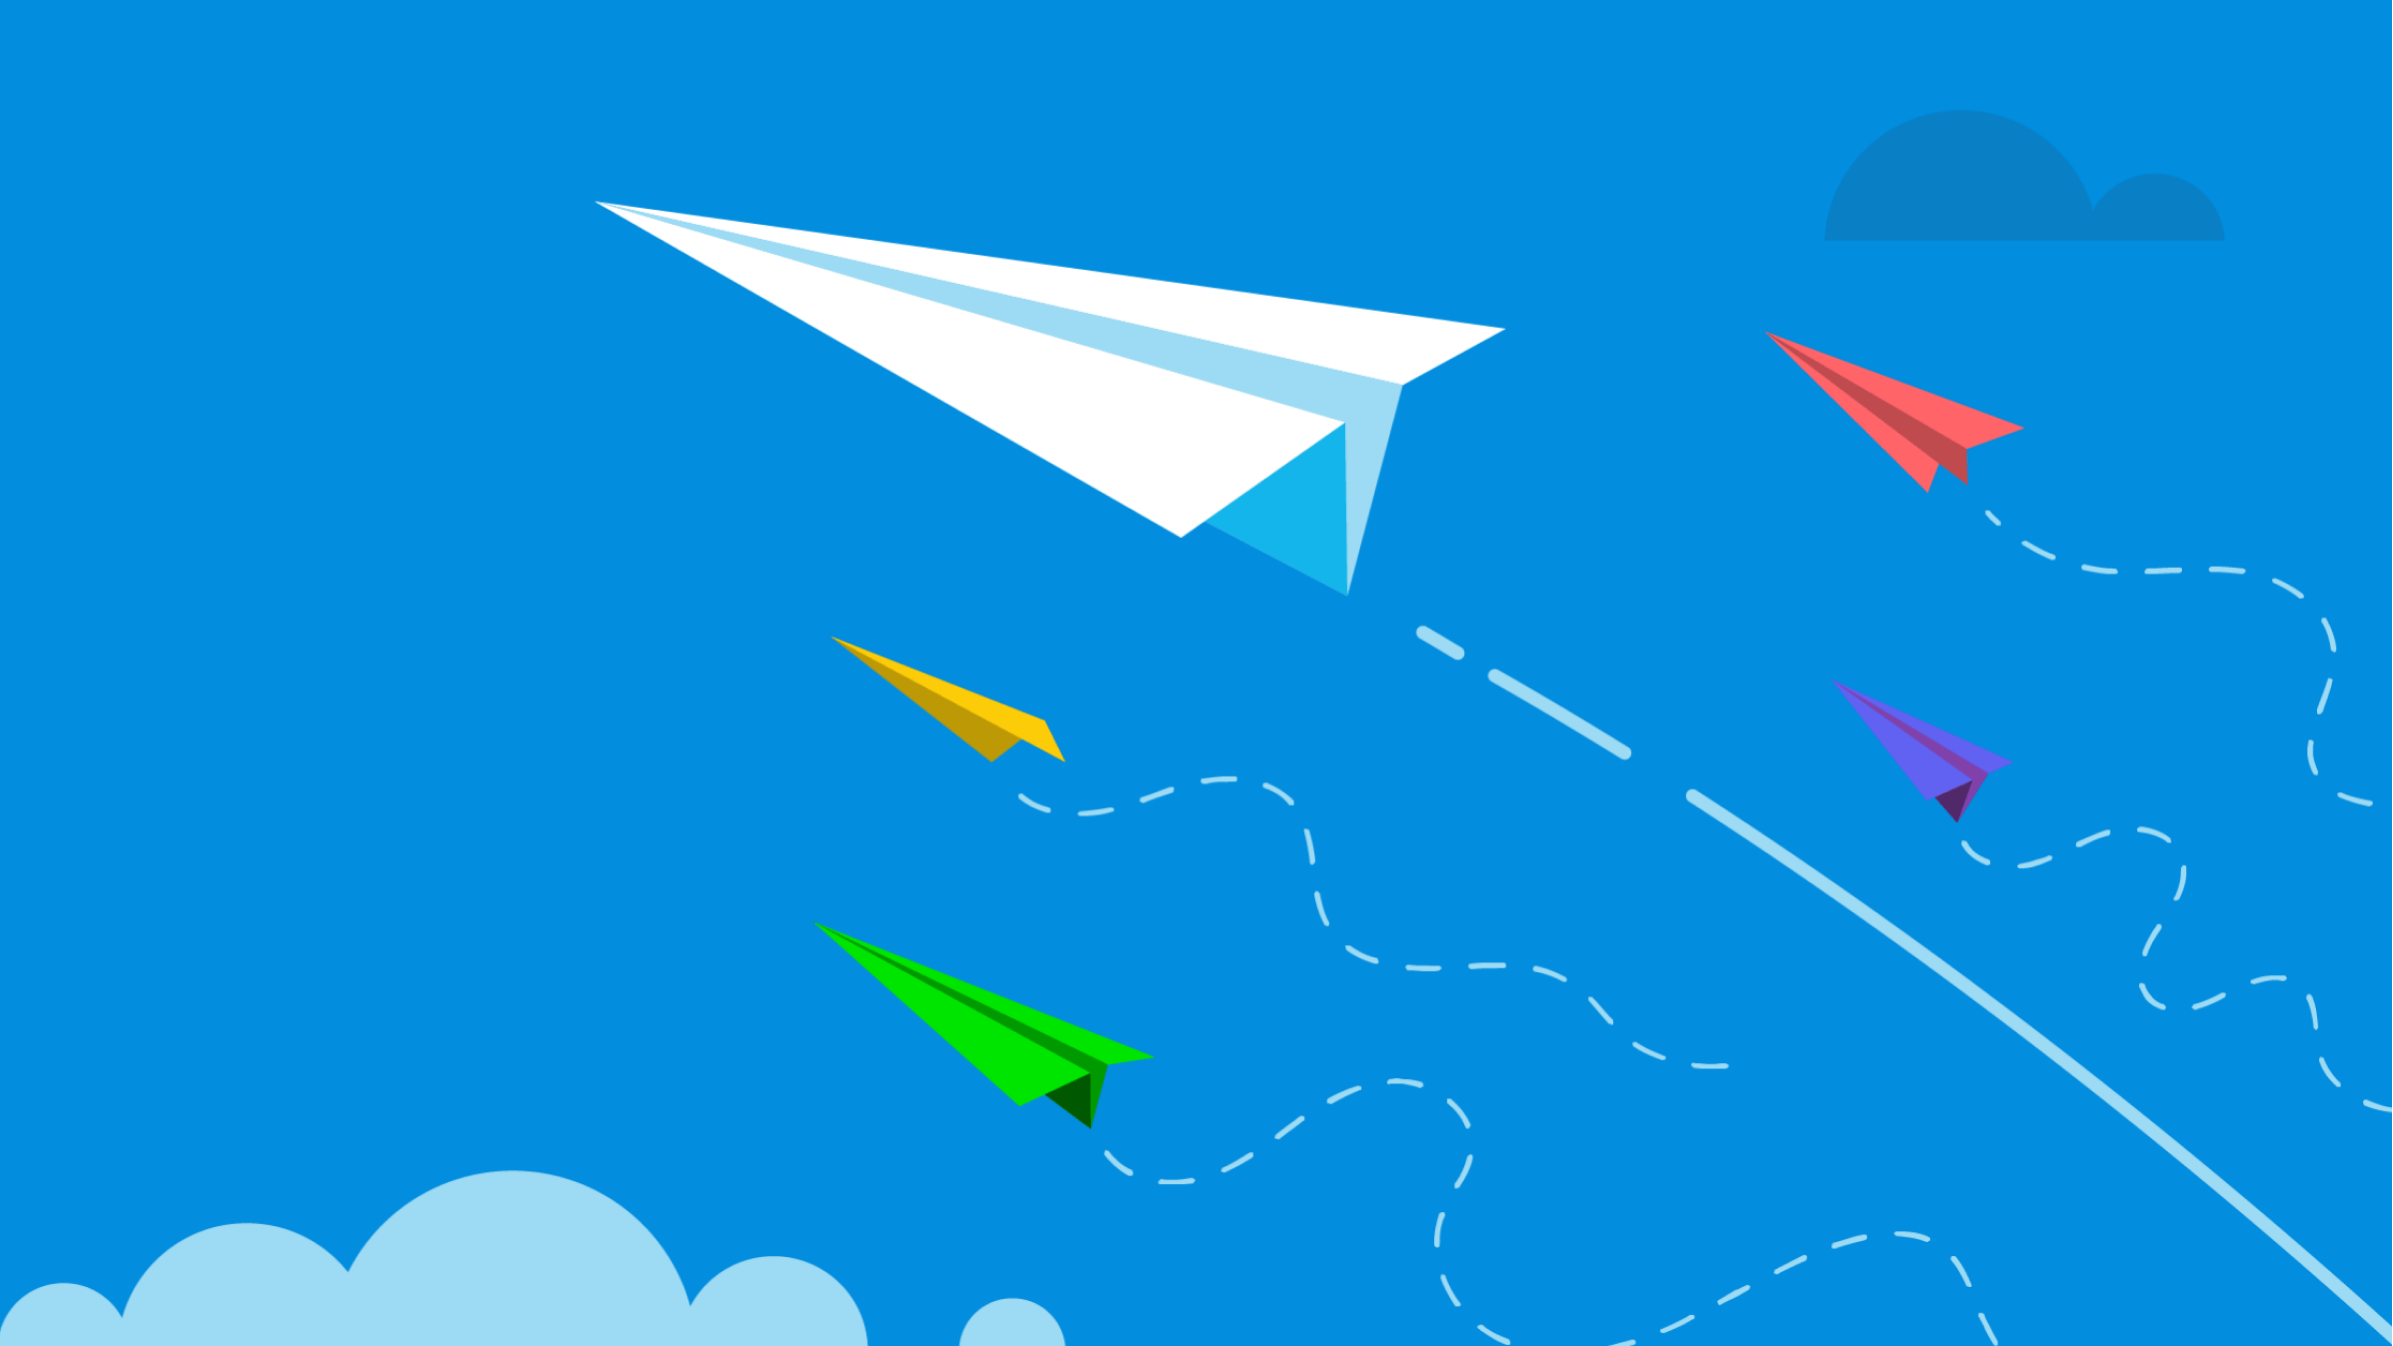 Illustration of paper airplanes flying through air